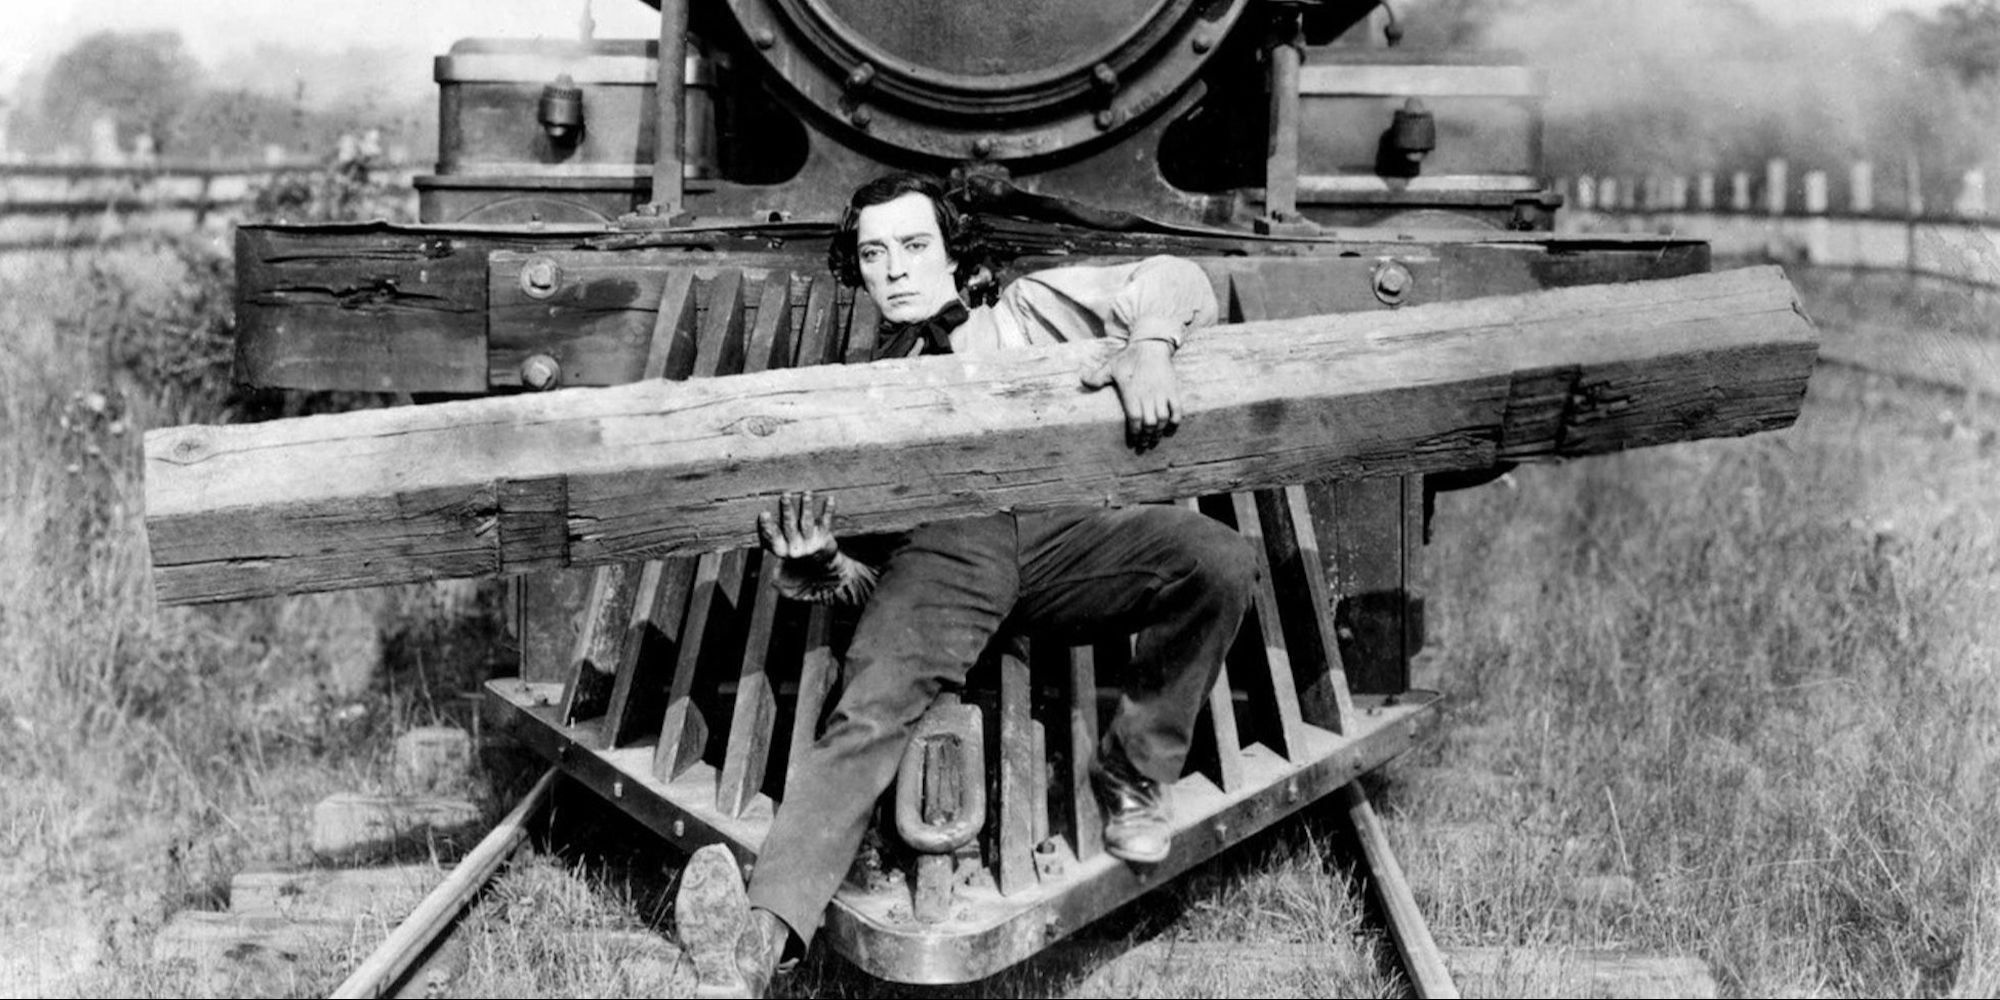 Buster Keaton doing a stunt on a train in 